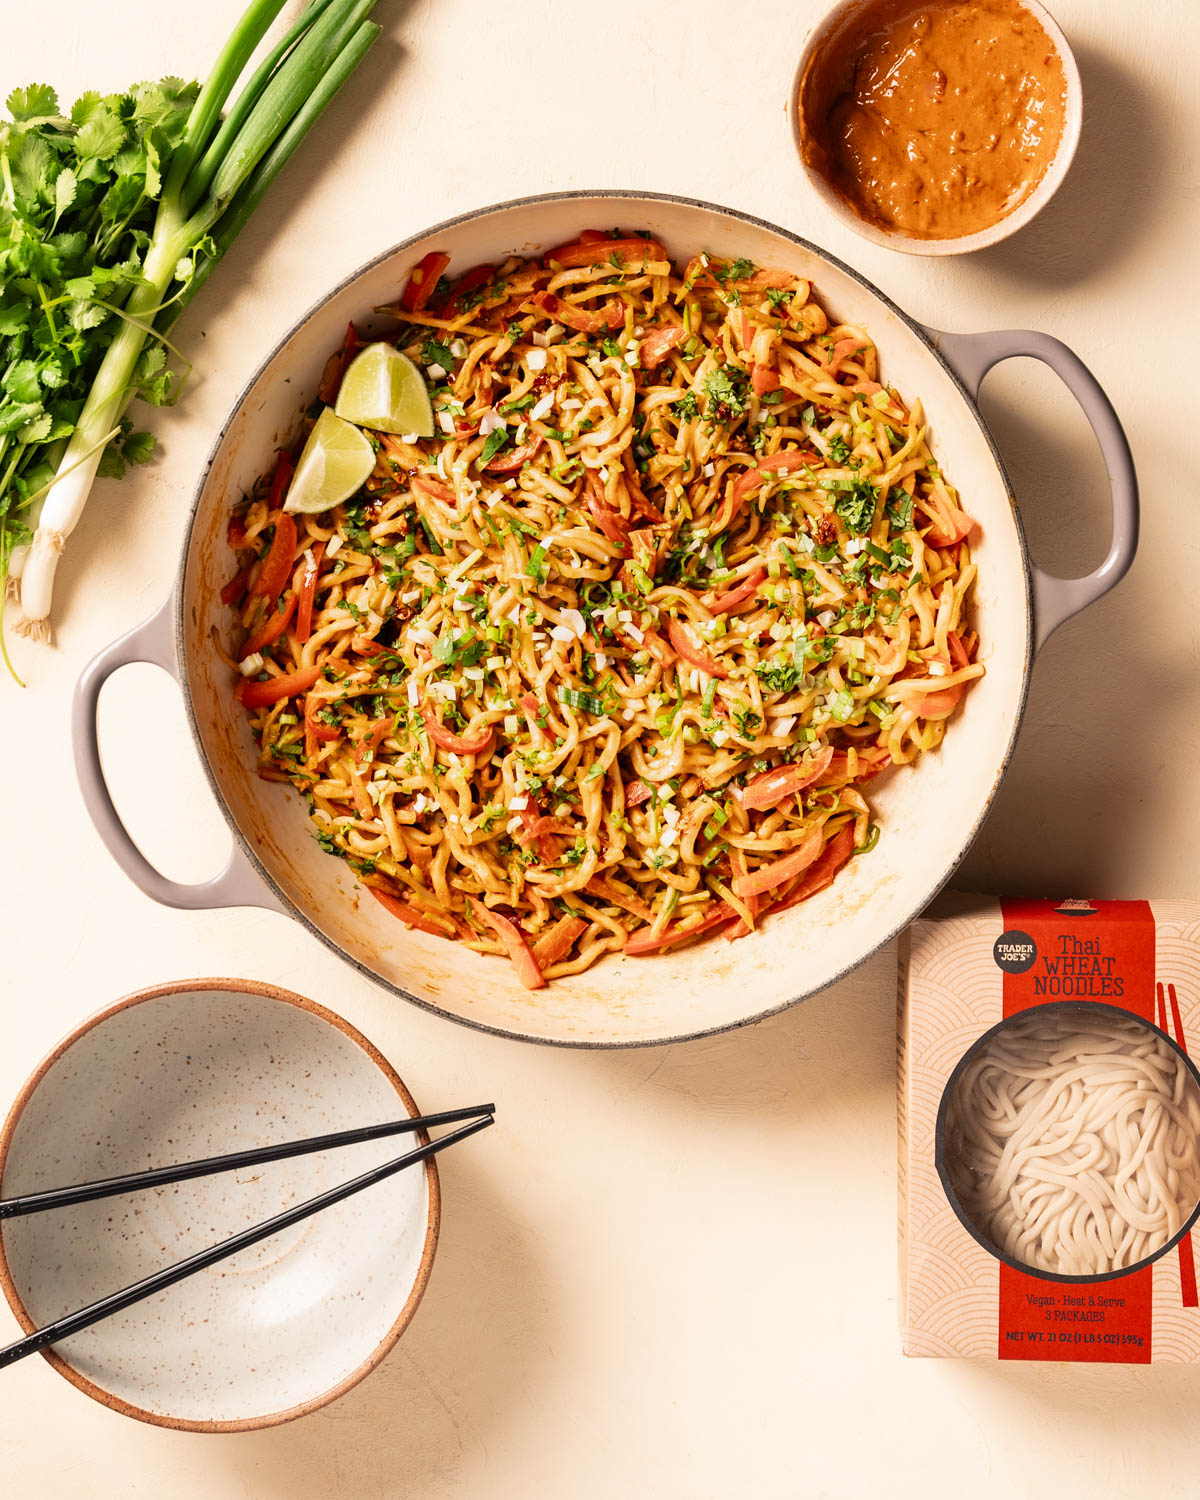 Trader Joes Thai Wheat Noodle PEanut Stir Fry in a pan with the package of noodles, a bowl with chopsticks, herbs, and peanut sauce as props surrounding the dish.